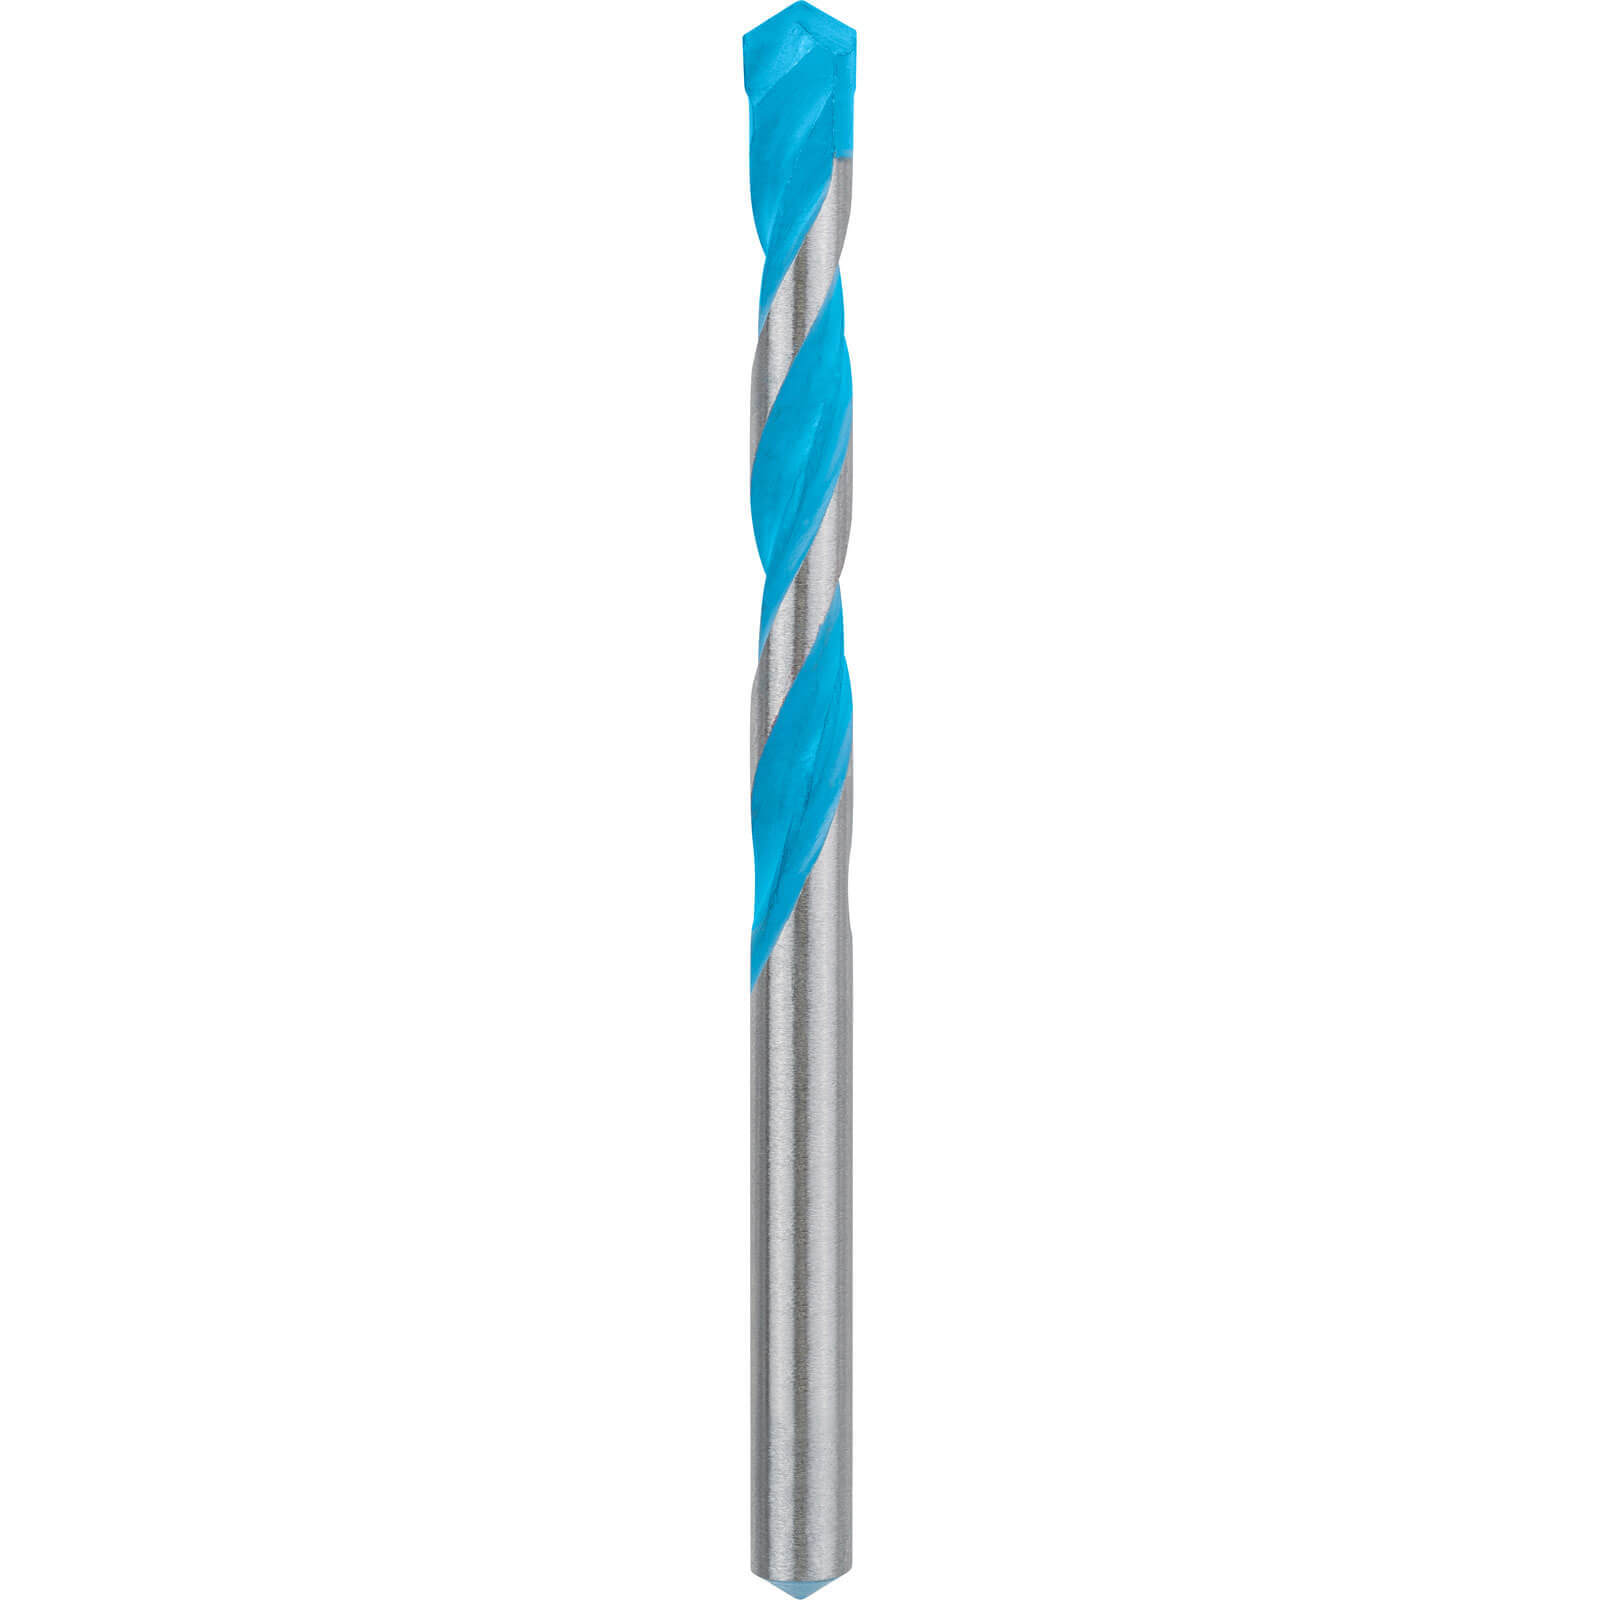 Photo of Bosch Expert Cyl-9 Multi Construction Drill Bit 7mm 100mm Pack Of 1